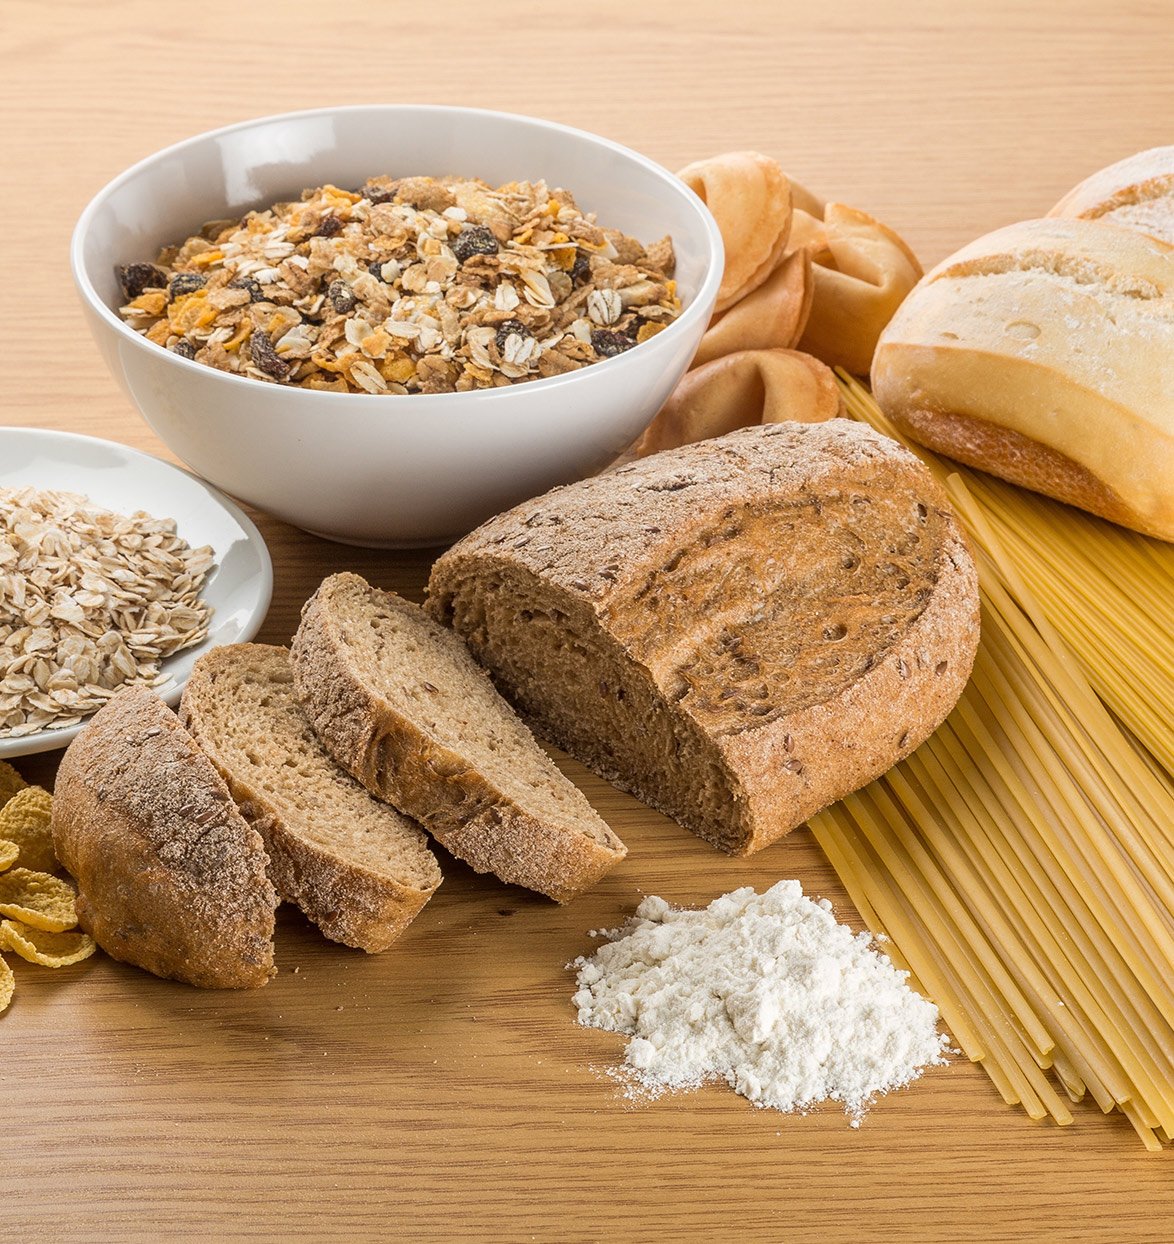 What Exactly Is Gluten?